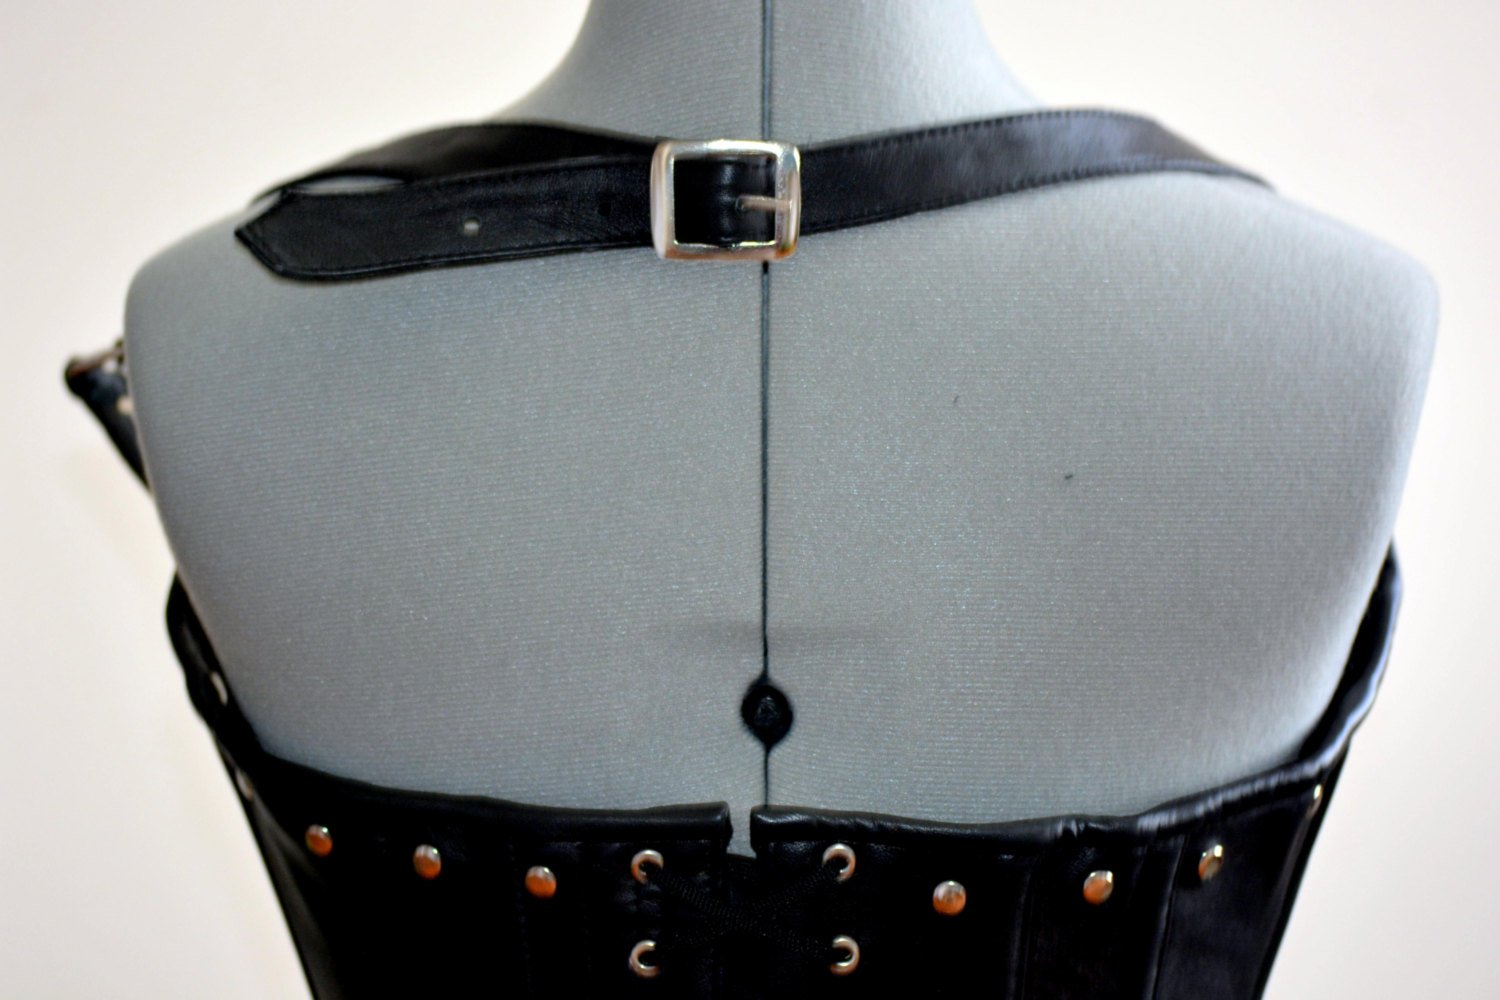 Real leather gothic underbust steampunk exclusive steel-boned authenti –  Corsettery Authentic Corsets USA